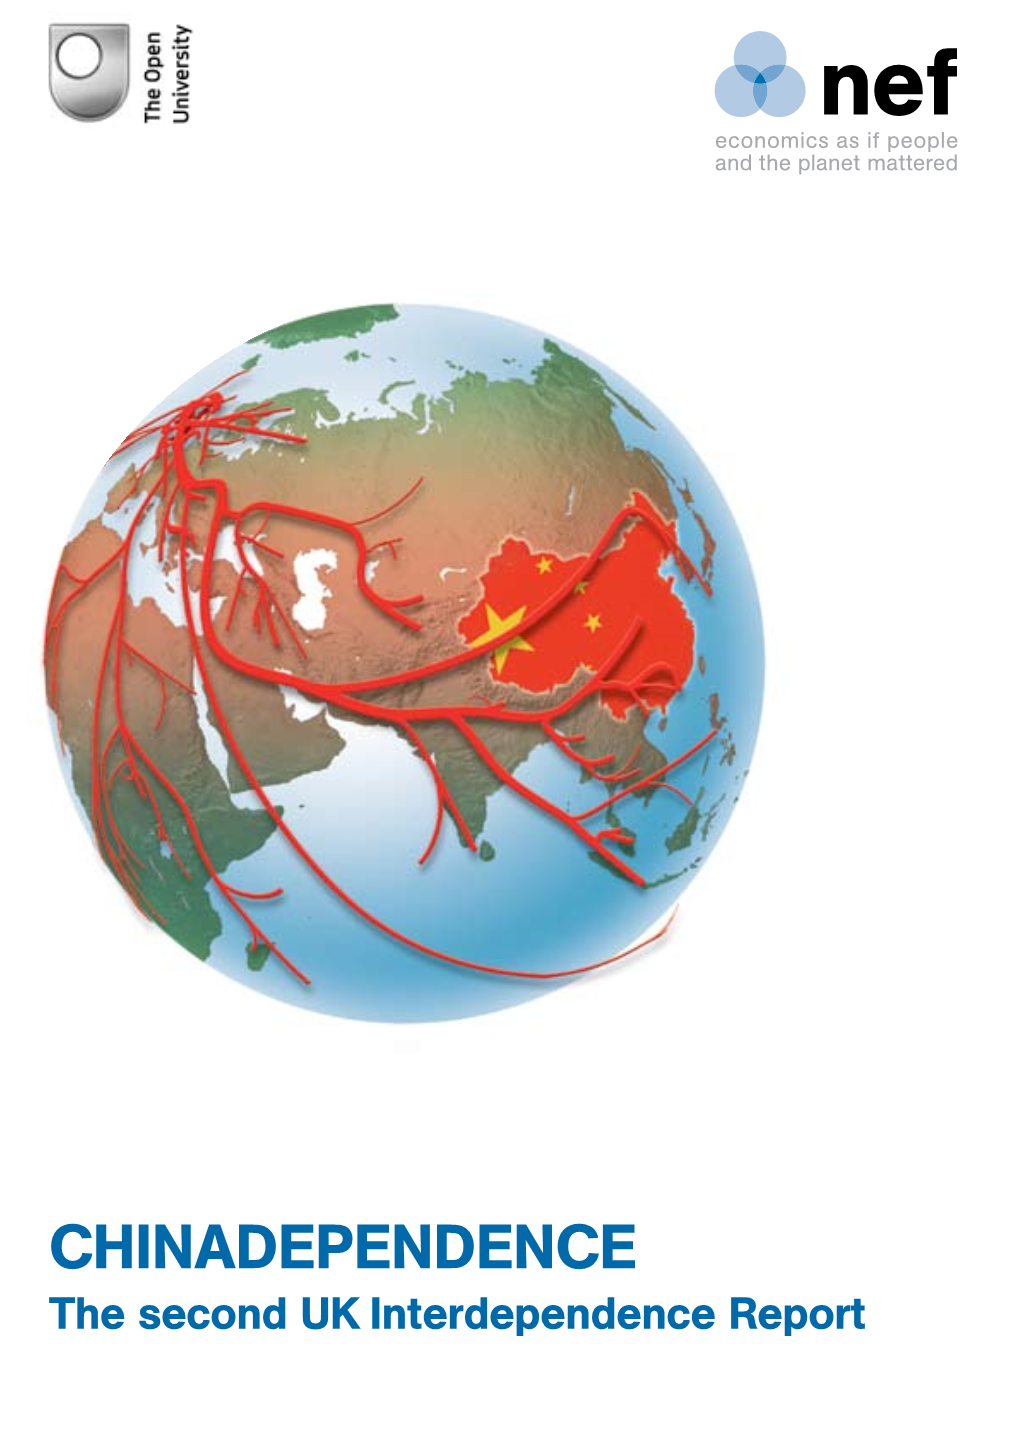 Chinadependence the Second UK Interdependence Report the UK’S Global Ecological Footprint